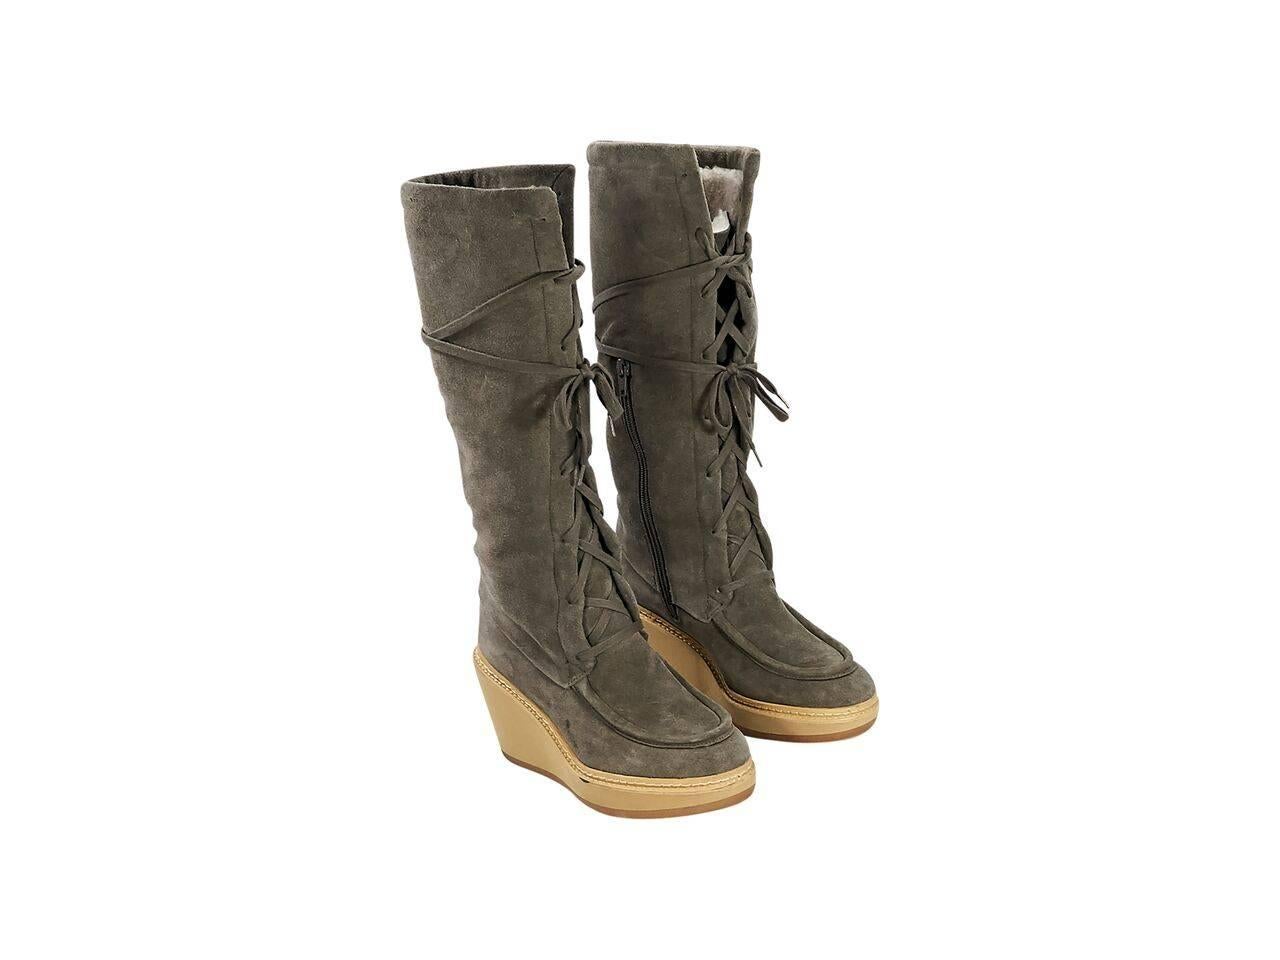 Product details:  Olive green suede tall wedge boots by See By Chloe.  Lace-up front.  Round moc toe.  Inner half zip closure. 
Condition: Pre-owned. Very good.
Est. Retail $ 700.00